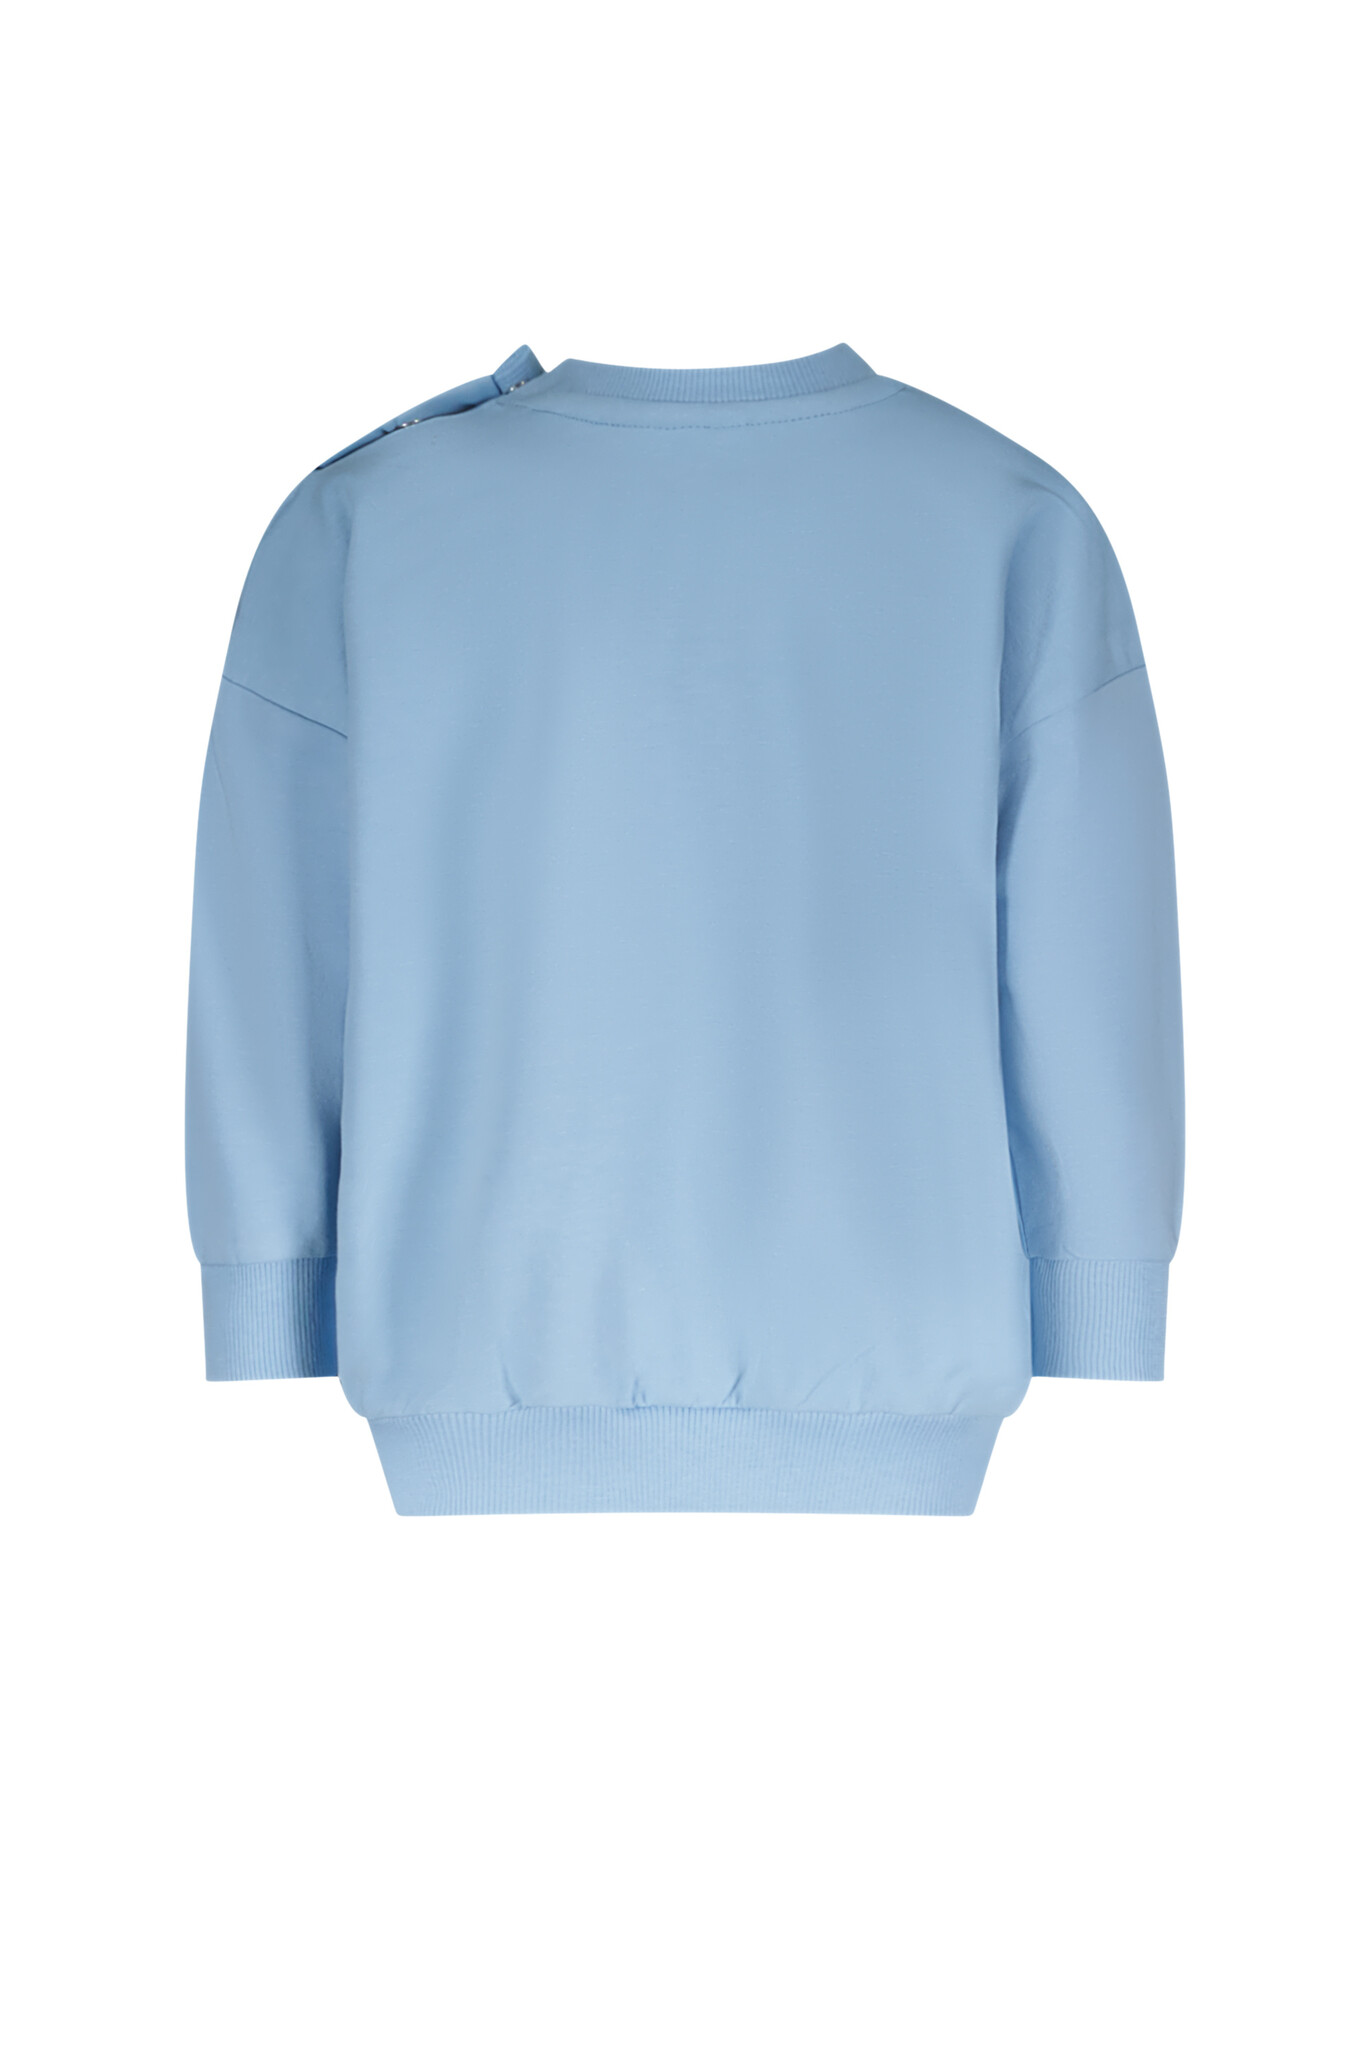 The new chapter Ché Sweater | Blue Bell